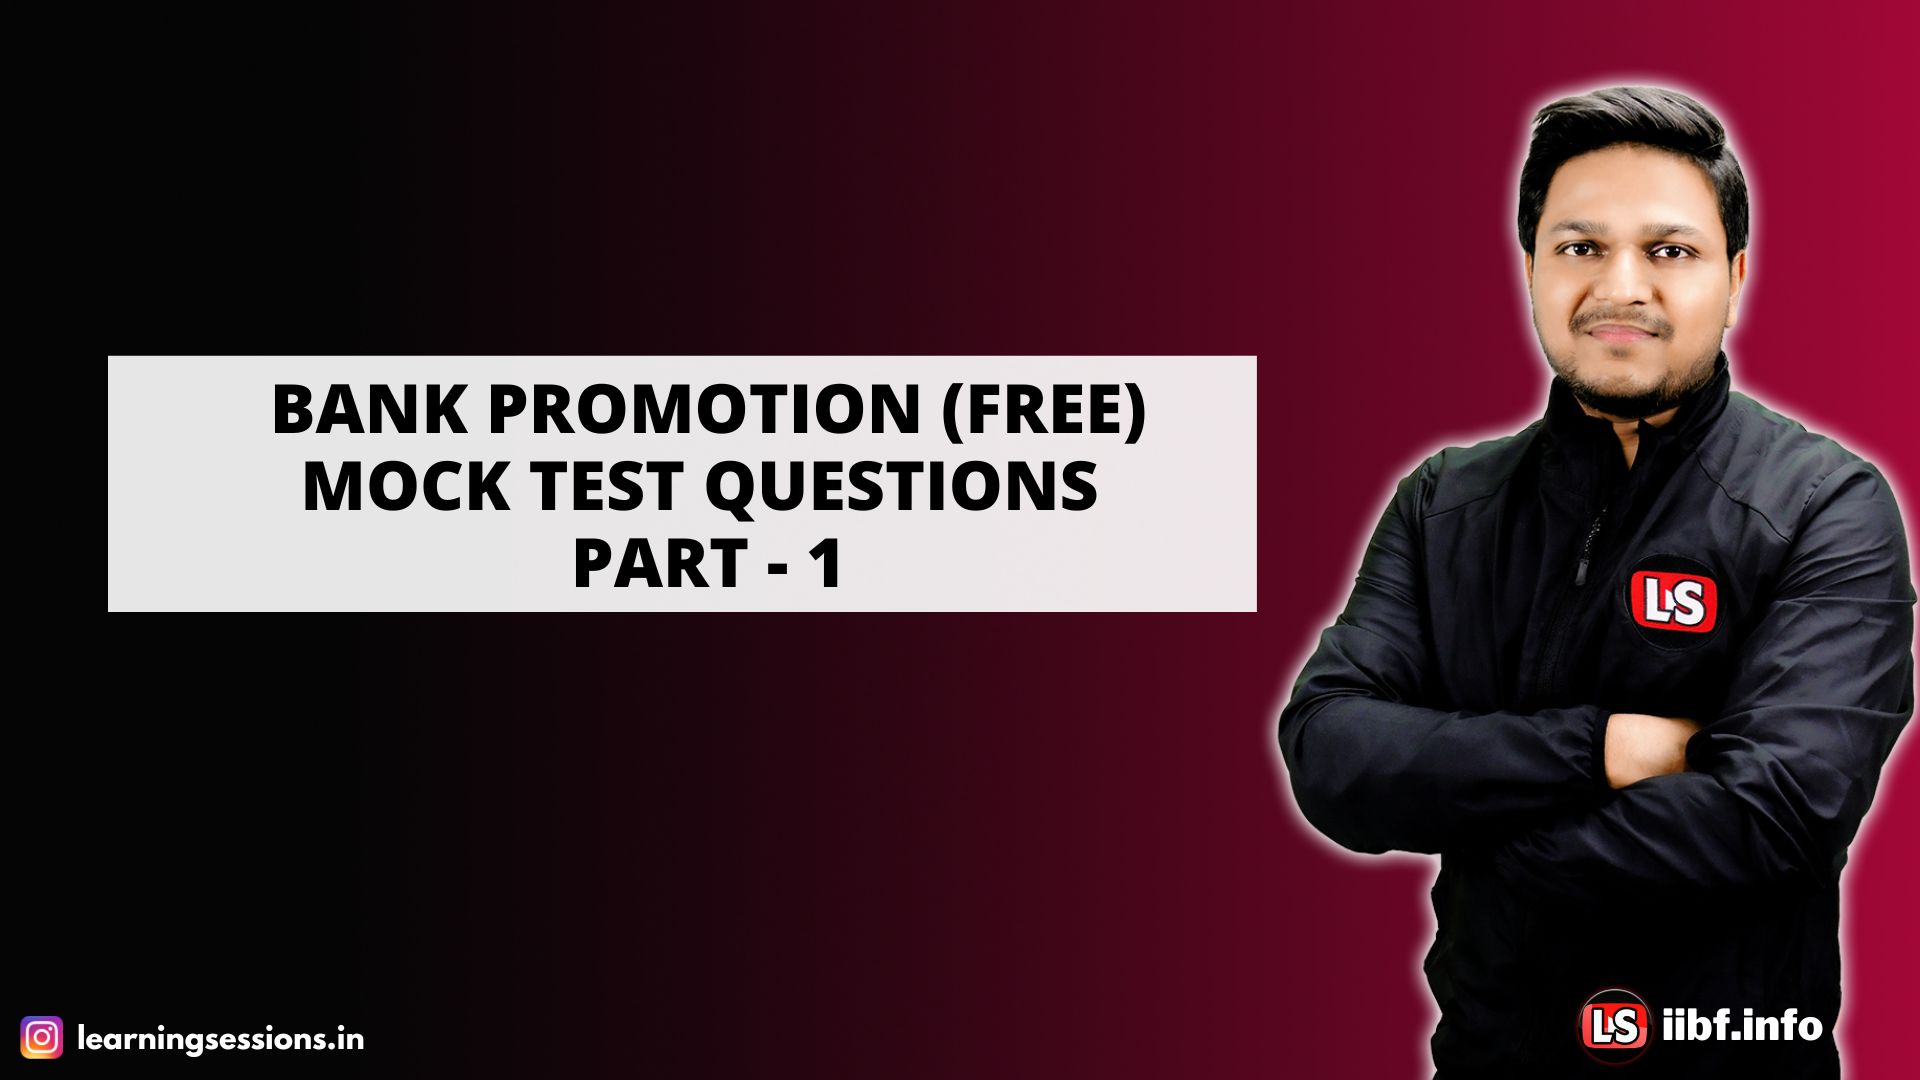 BANK PROMOTION (FREE) MOCK TEST QUESTIONS PART - 1  | GENERAL ENGLISH | IBPS MOCK TESTS FOR INTERNAL PROMOTION EXAMS 